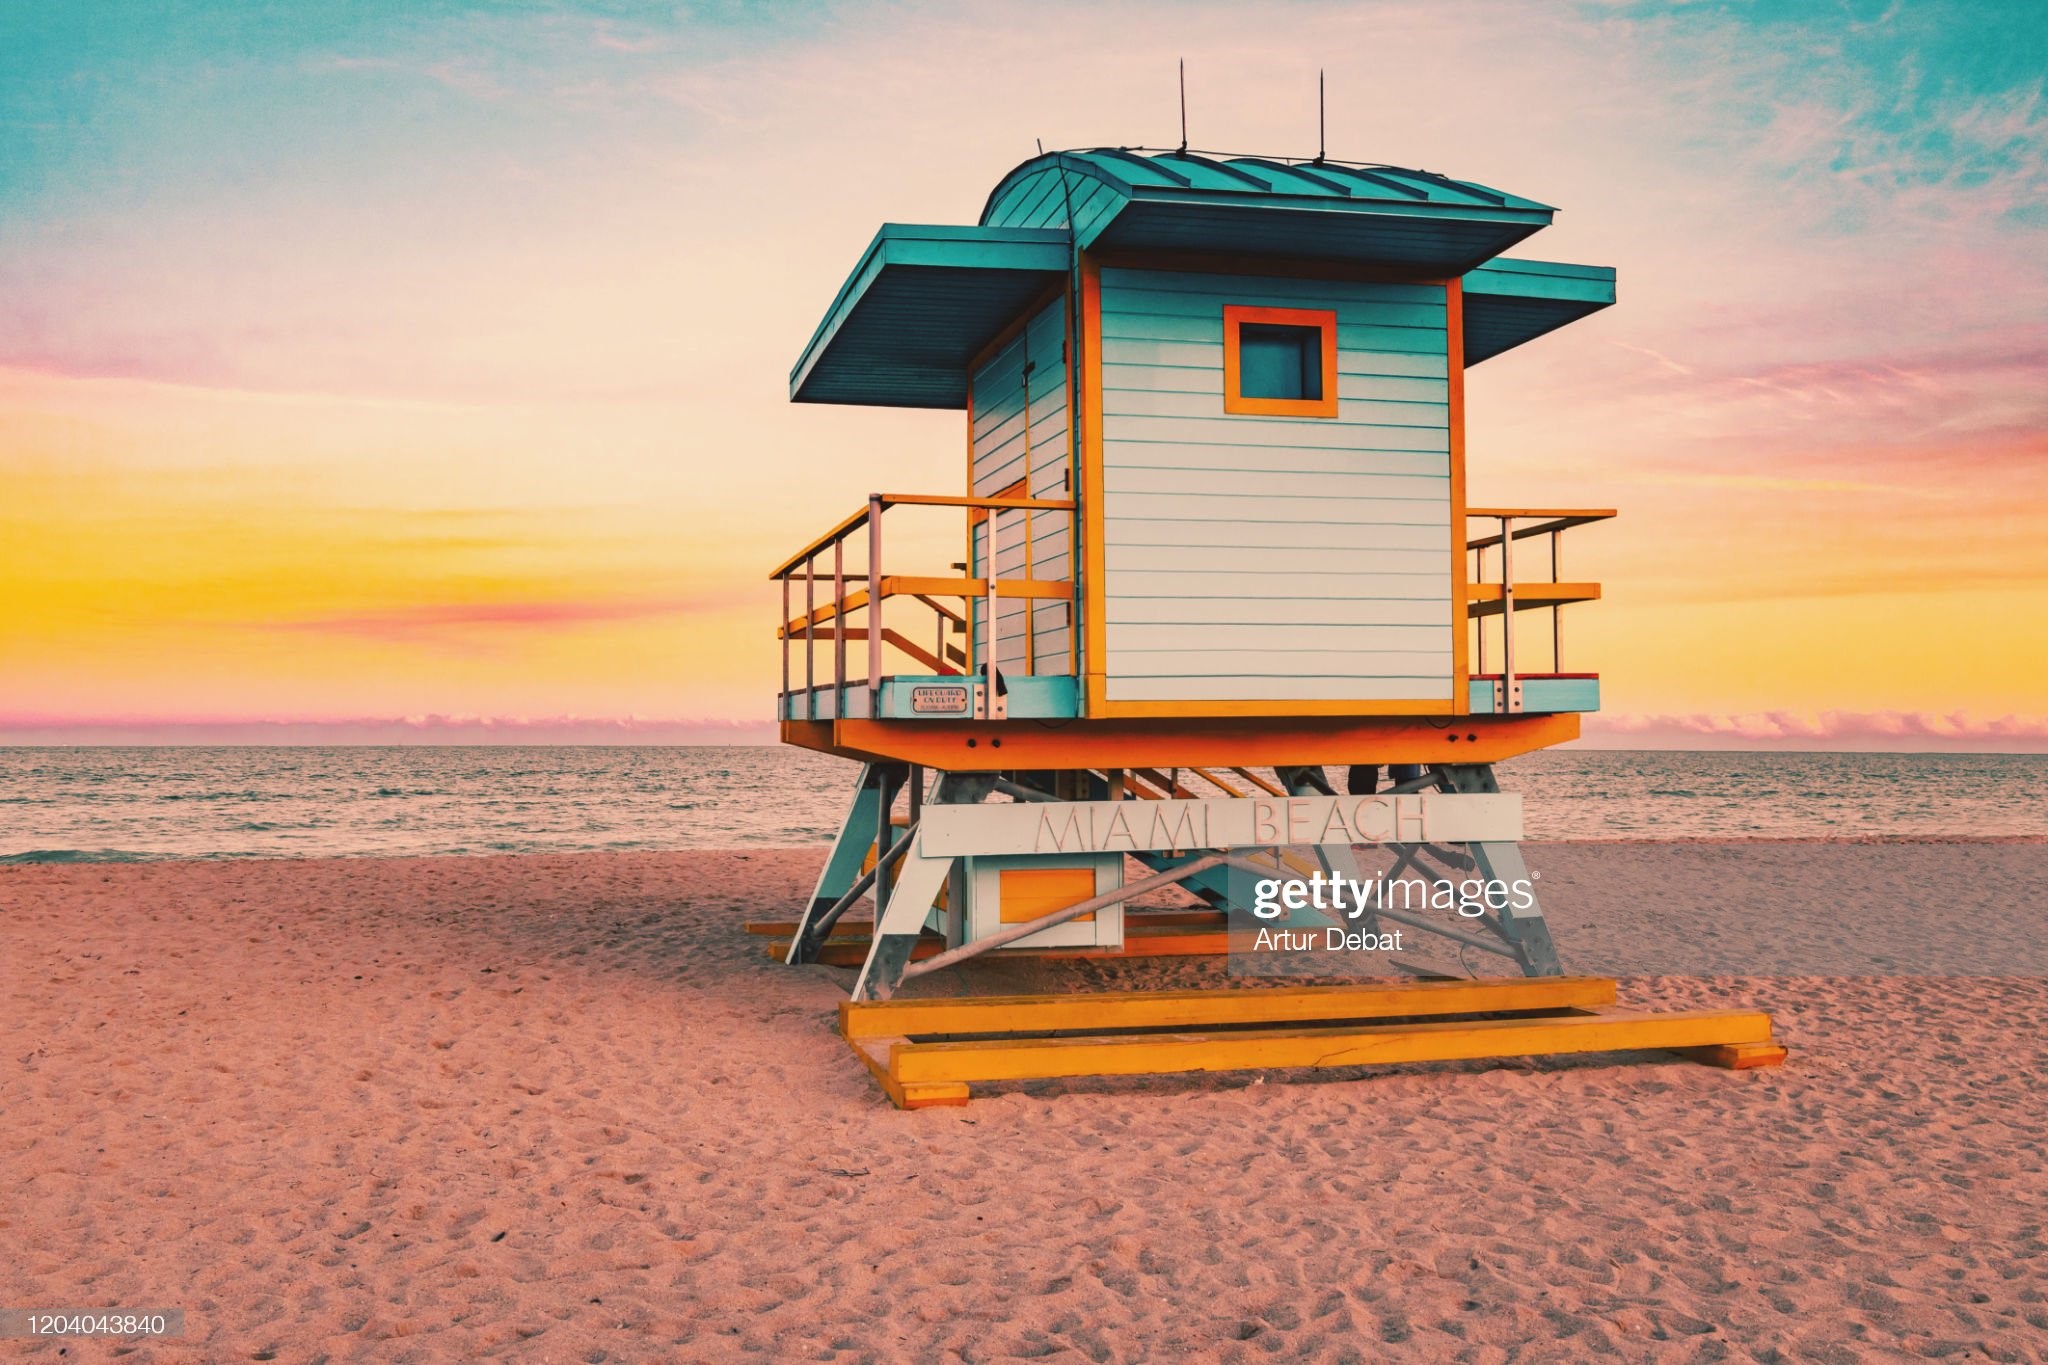 Colorful Miami Beach lifeguard tower with stunning sunset sky and empty beach.